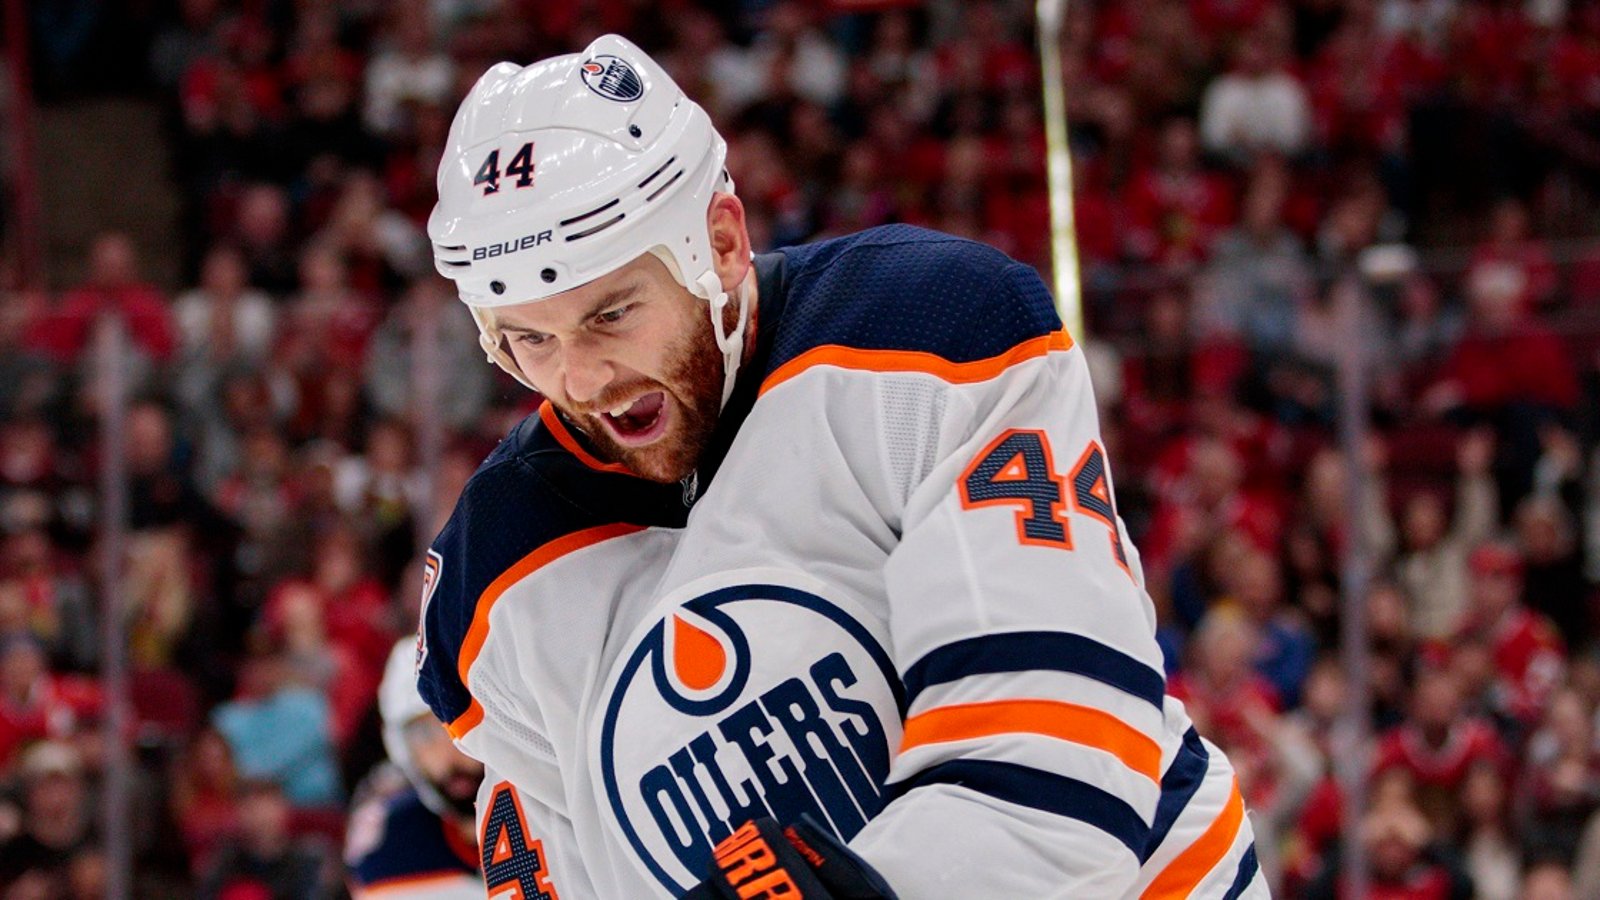 Oilers forced to make multiple lineup changes due to injuries & more.